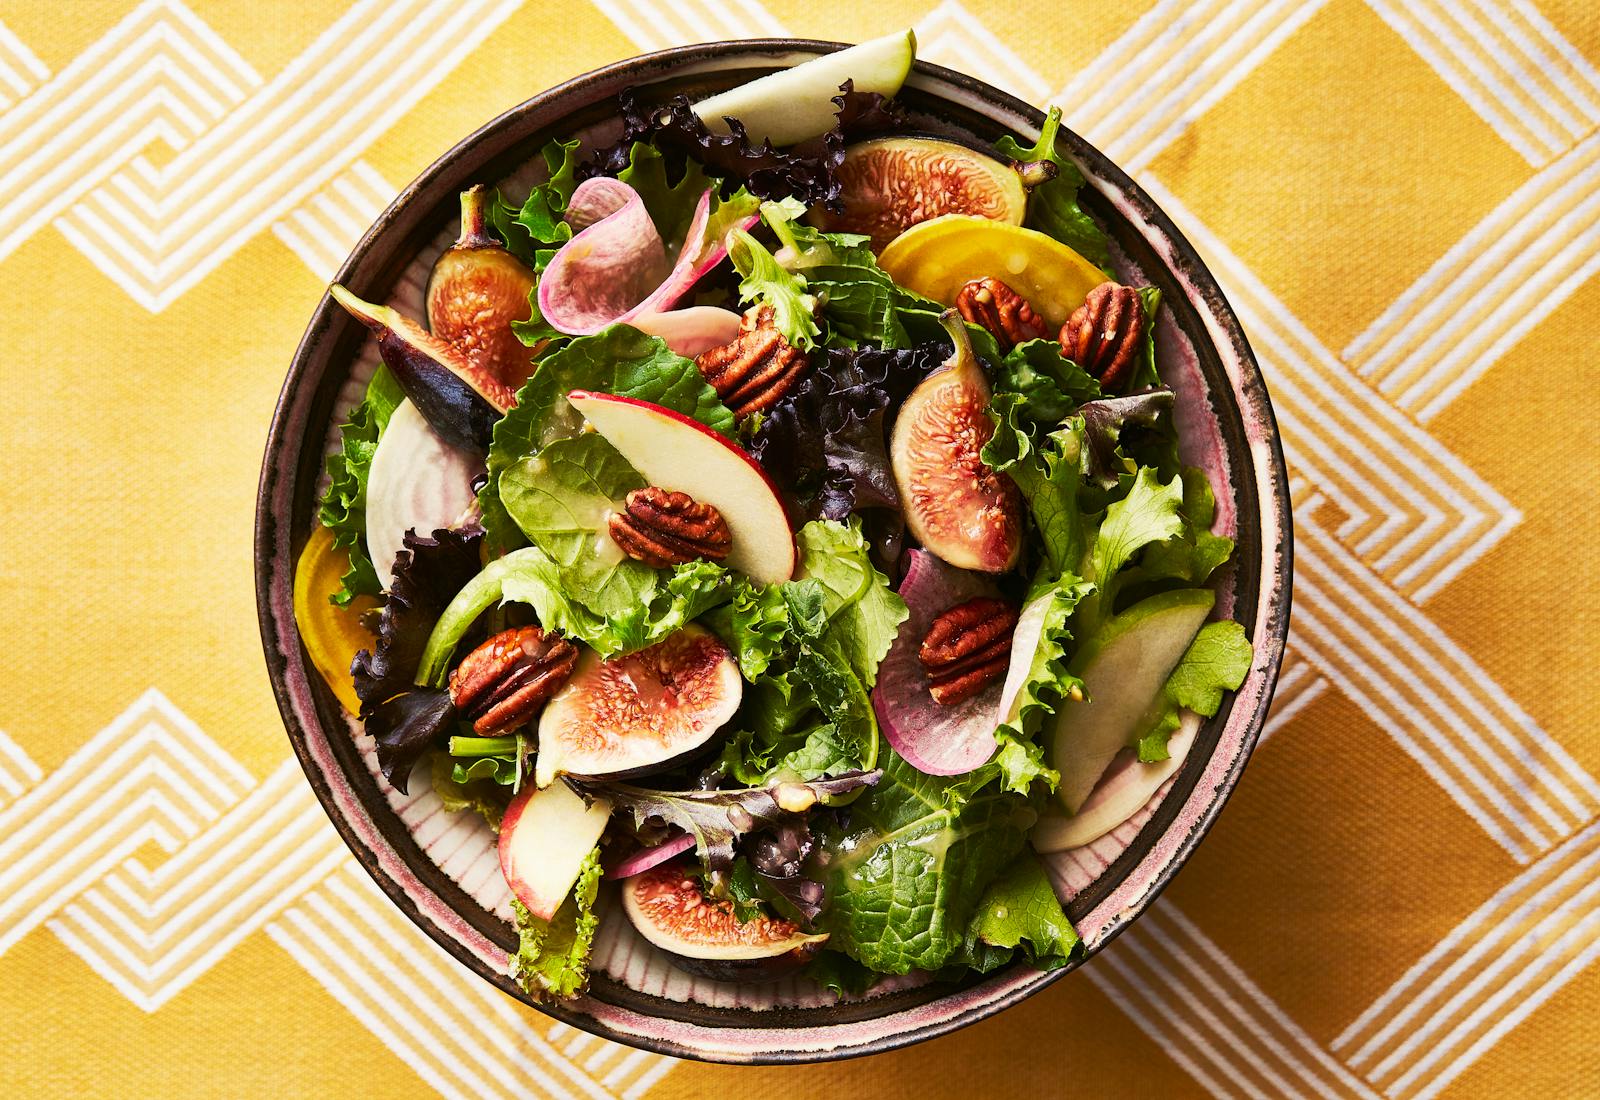 Apple, honey, and fig salad in serving bowl atop yellow tablecloth.